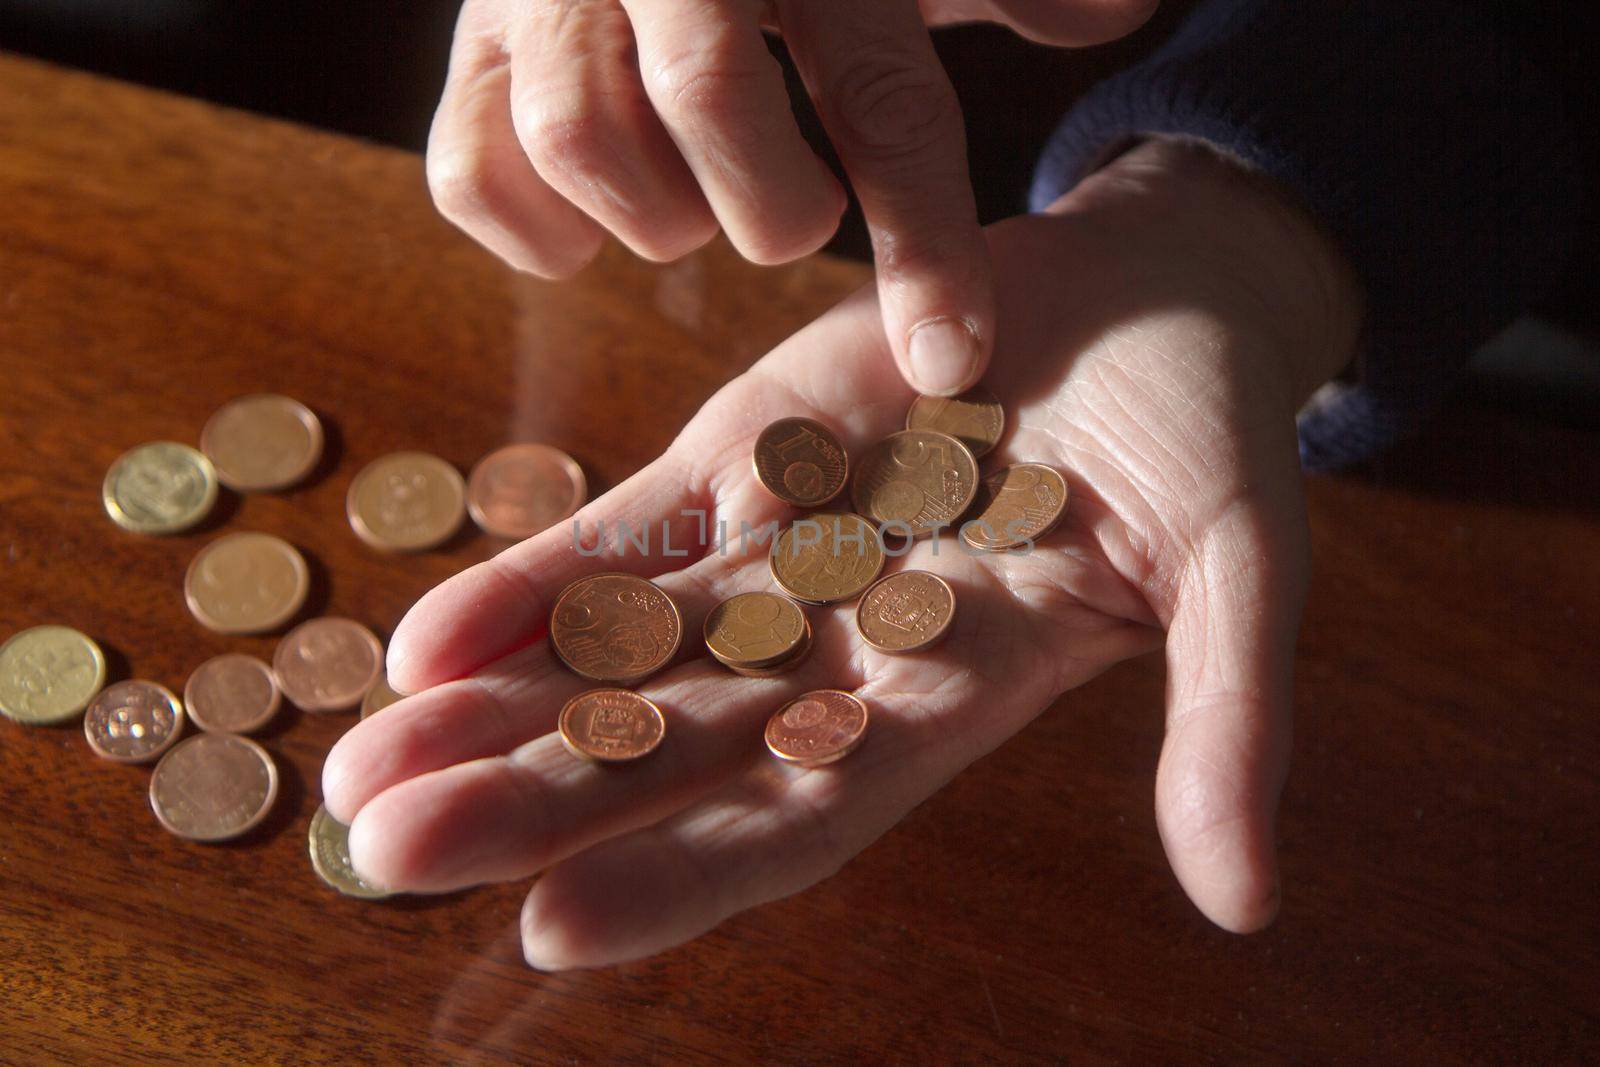 Wrinkled hands of elderly woman counting coins by AigarsR